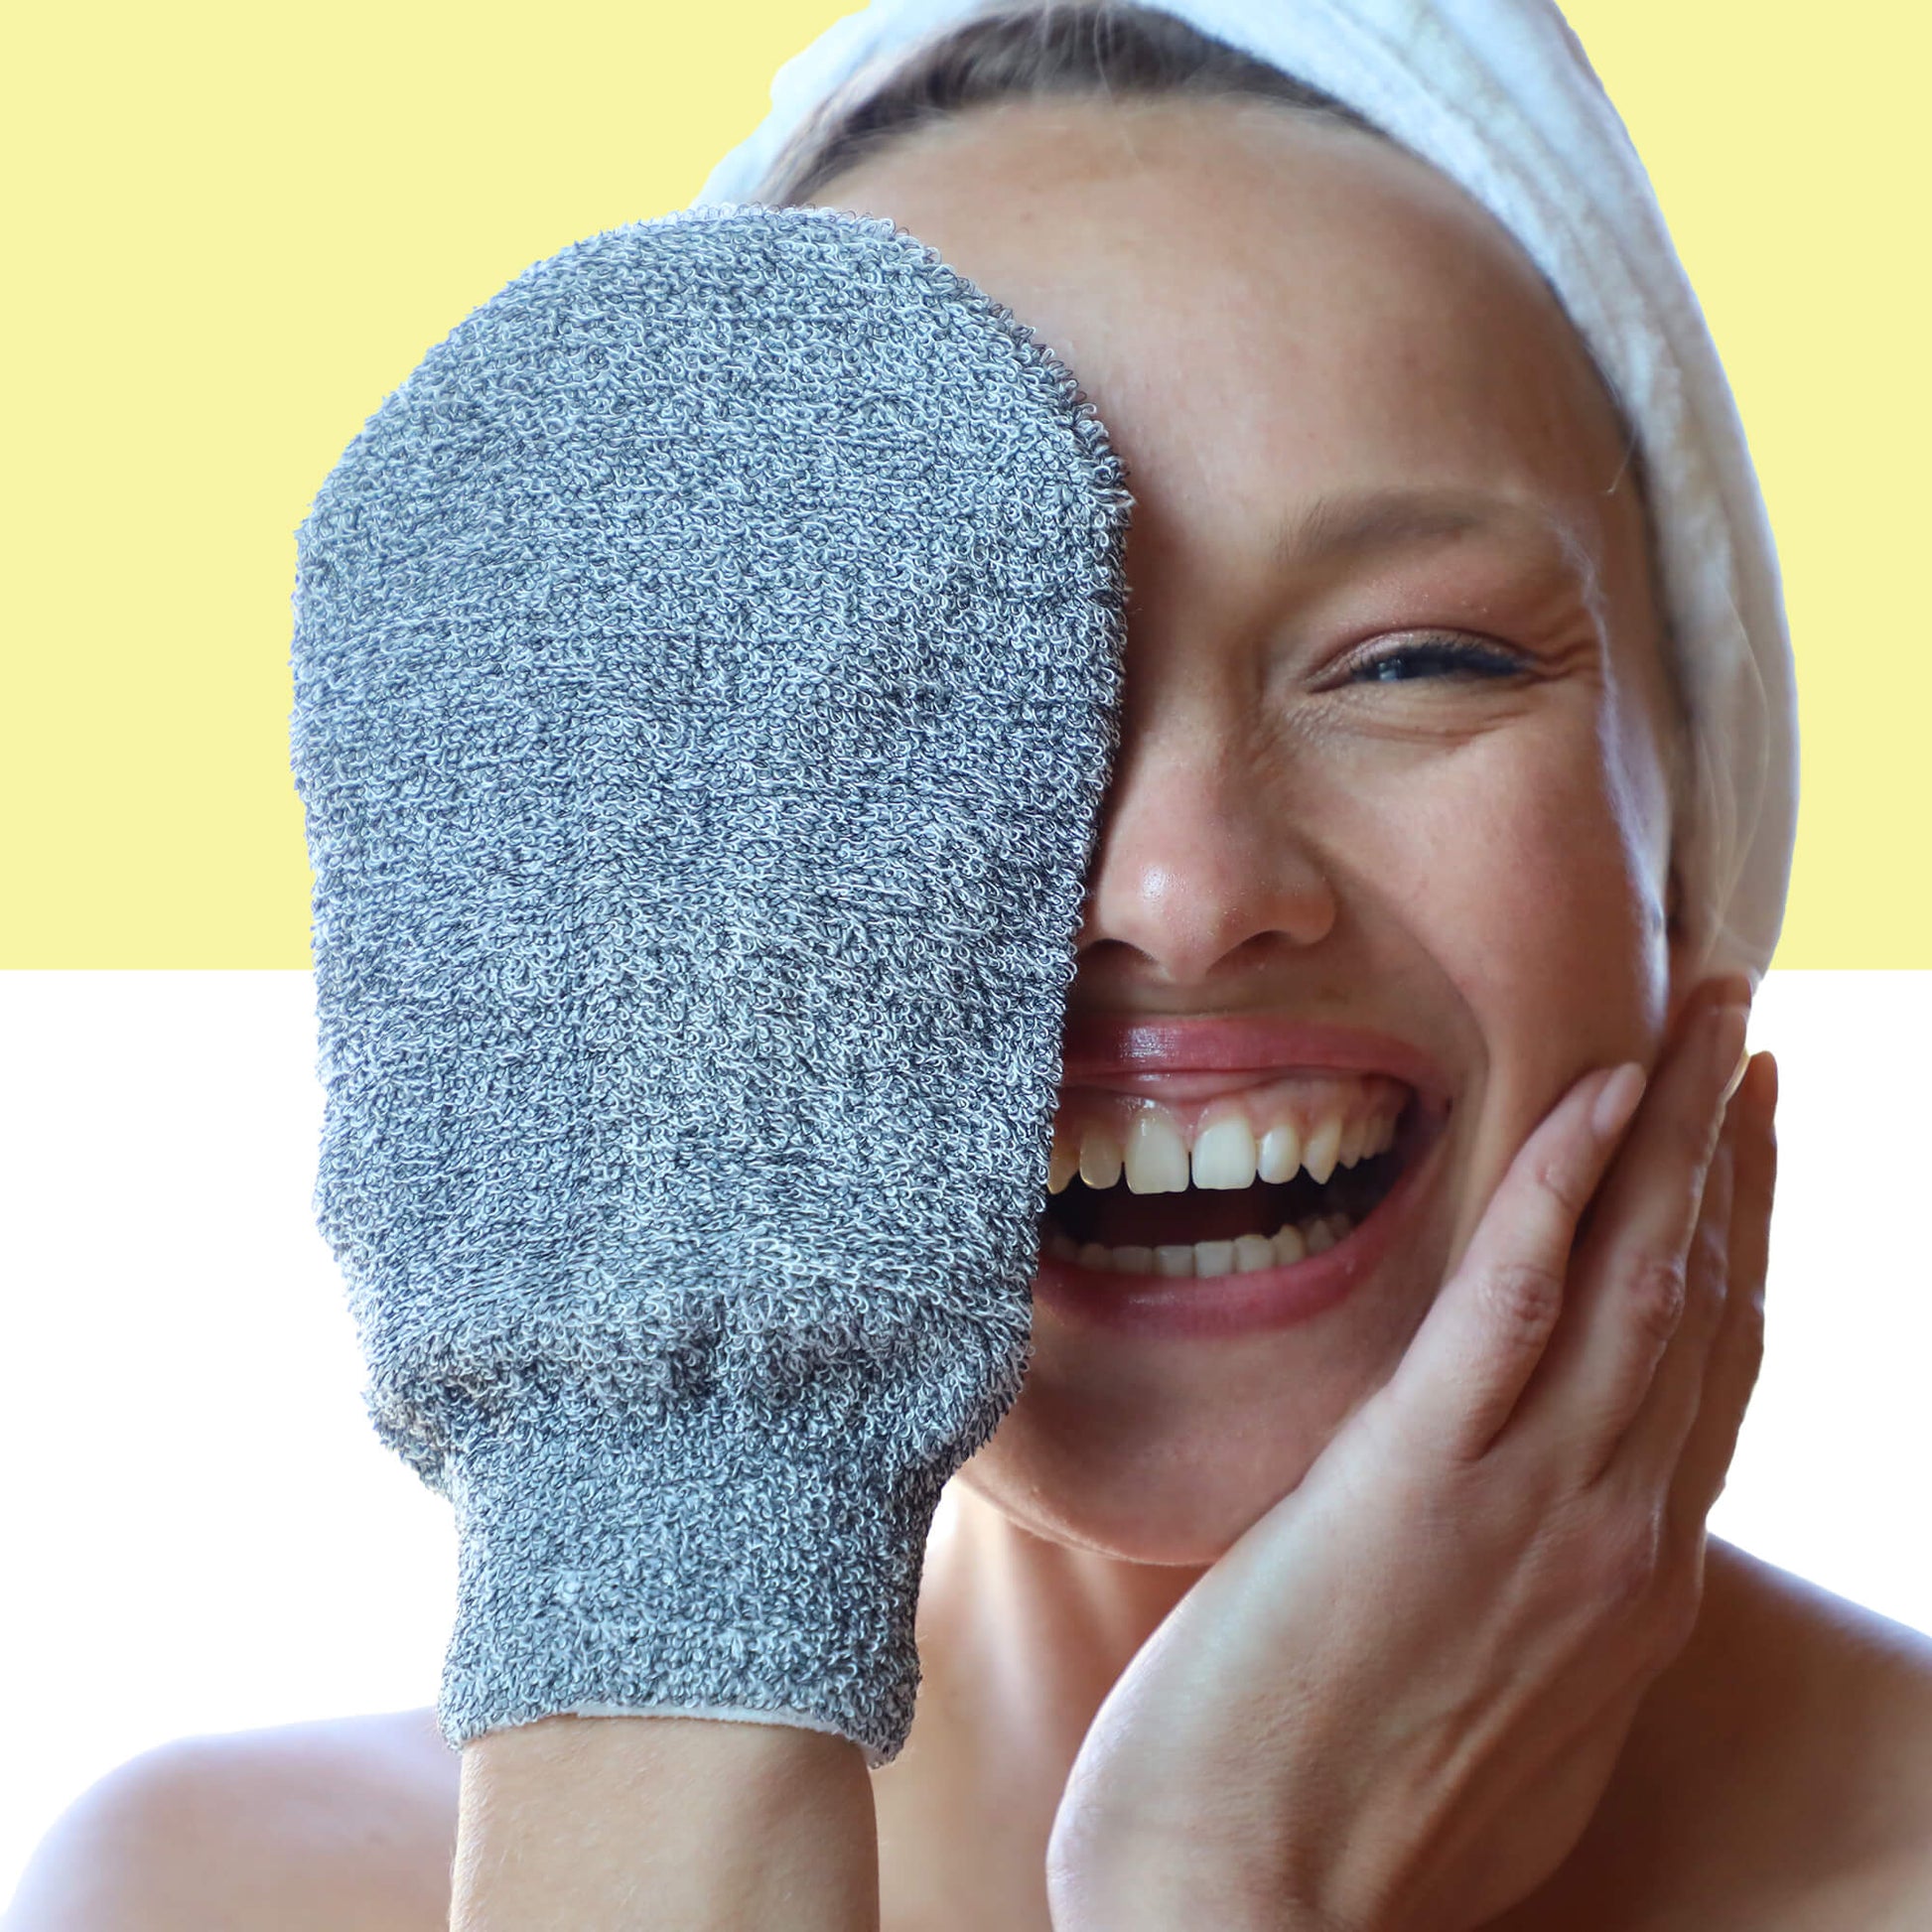 Afterspa Exfoliating Bamboo Mitt | to exfoliate the body.